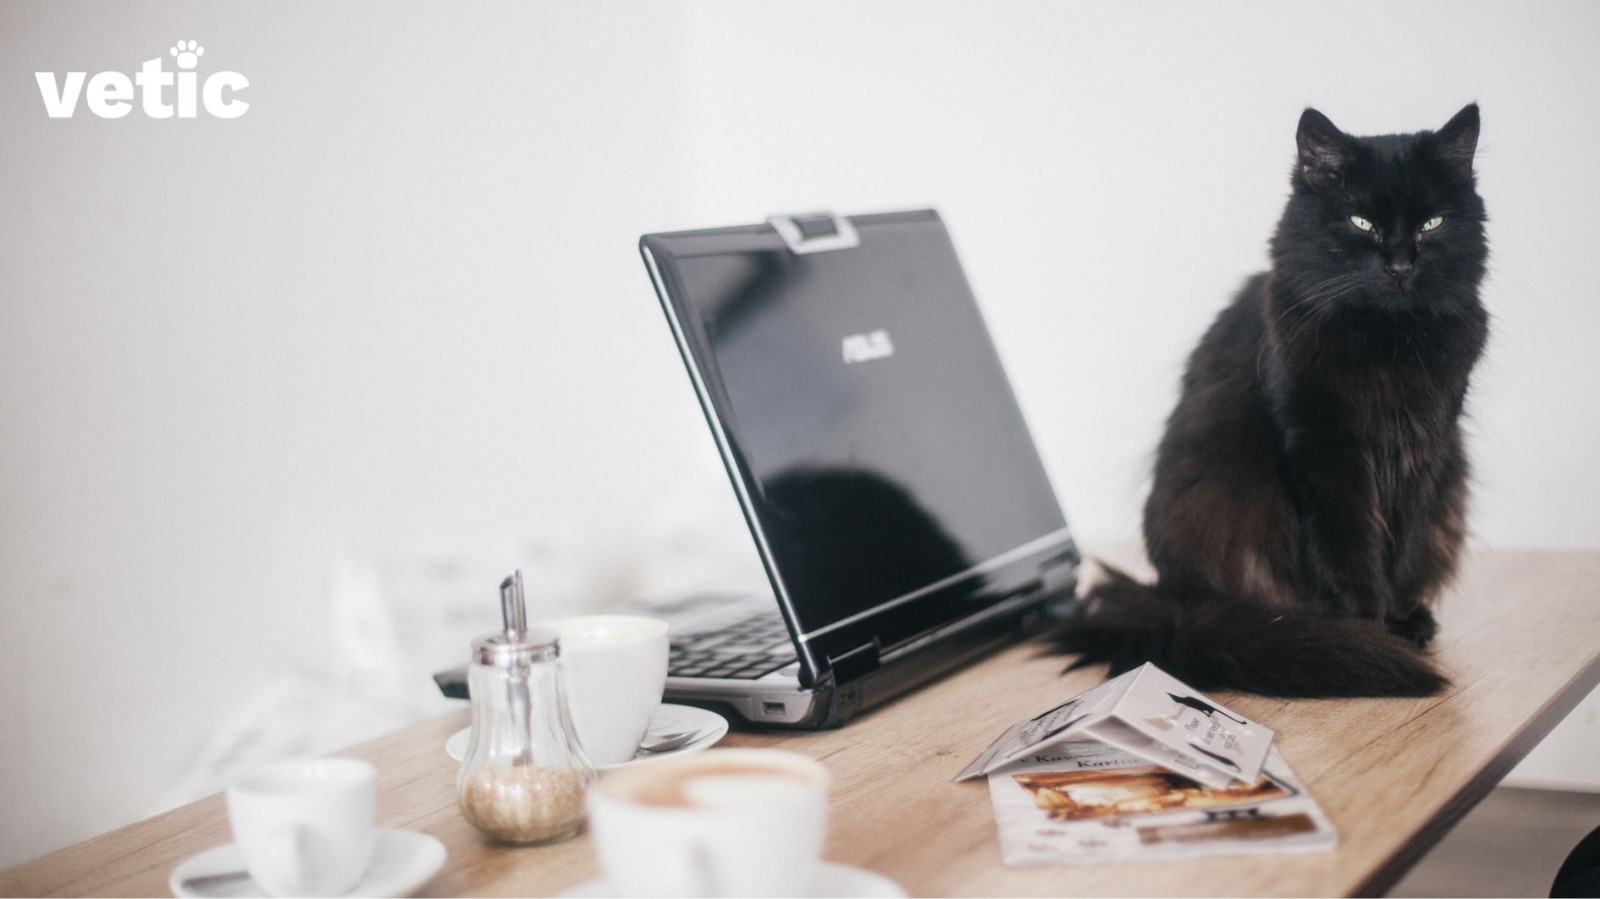 One black cat sitting next to an ASUS laptop, coffee cups and open brochures on a work desk. On take your pet to work day, consider your coworkers preferences, allergies and fears.